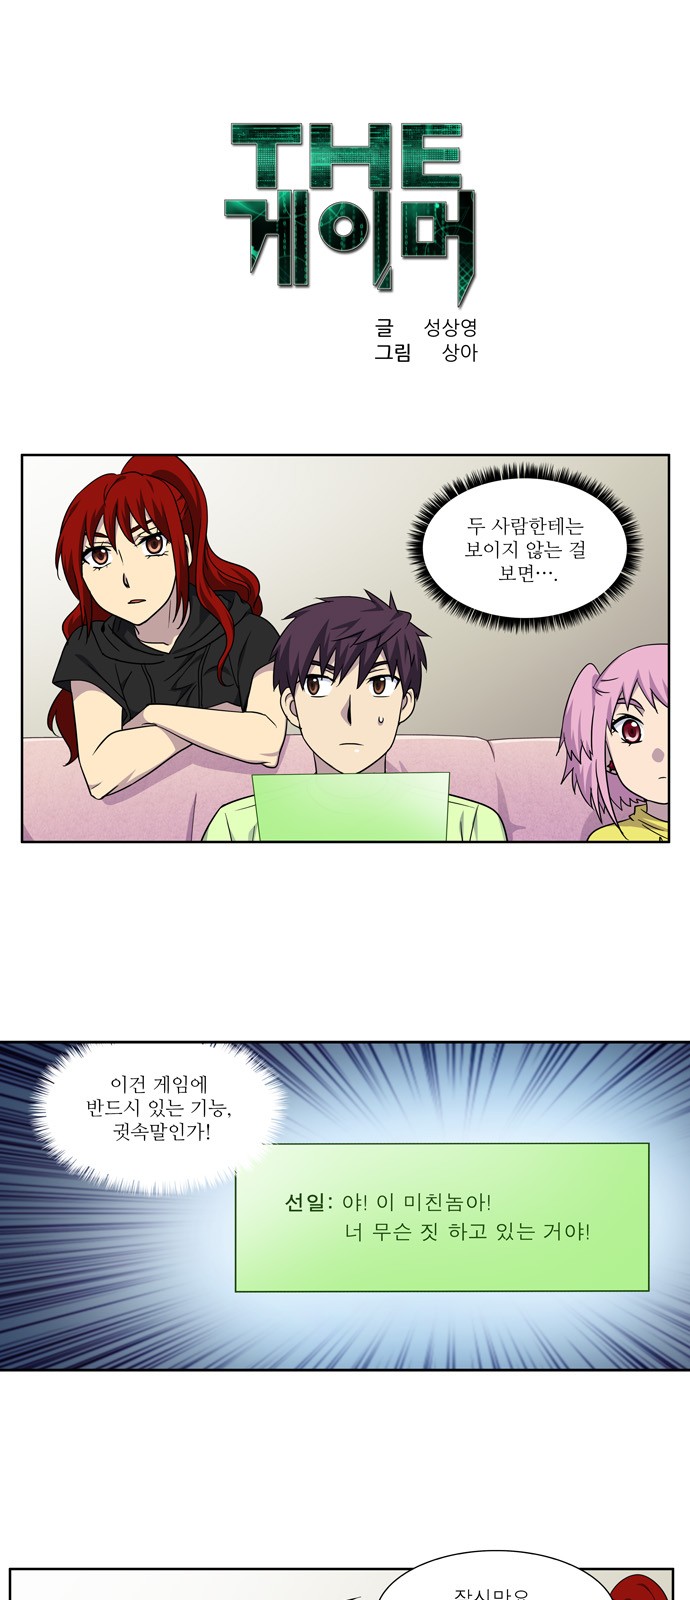 The Gamer - Chapter 301 - Page 1